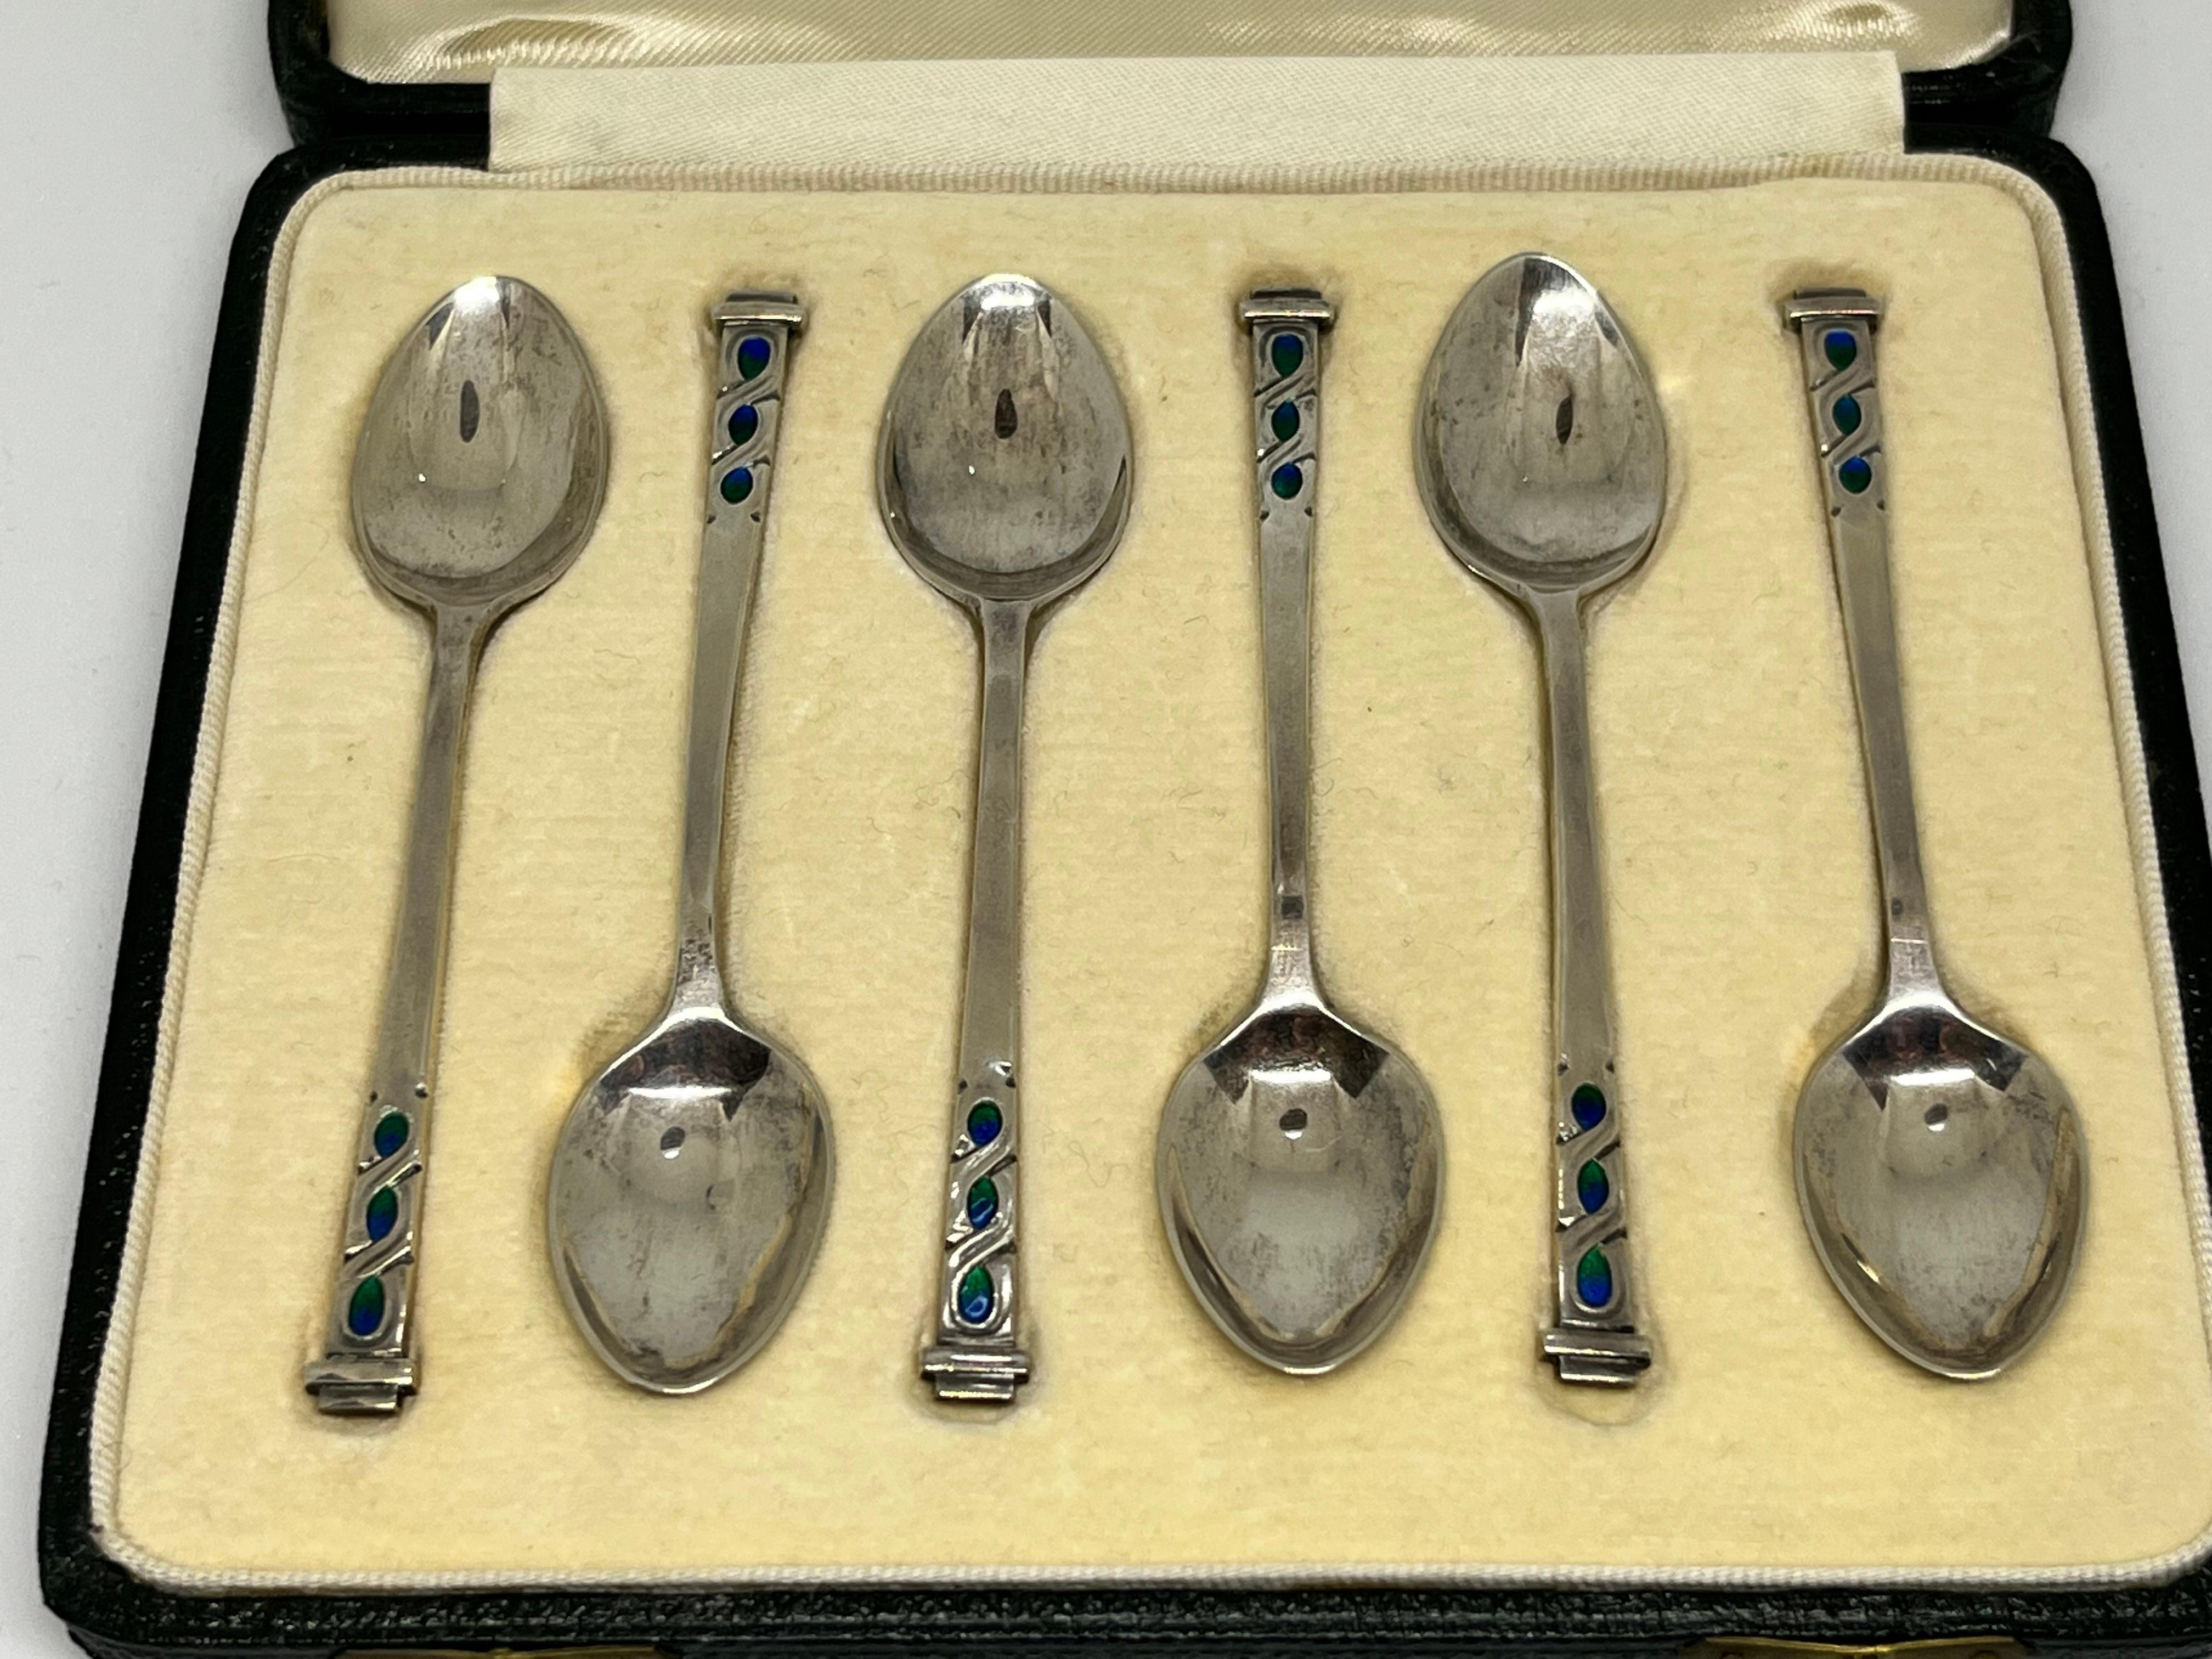 Liberty of london.

A fine quality set of six Art Deco sterling silver and enamel coffee spoons, presented in the original Liberty of London fitted presentation case.

The finial of each coffee spoons is finely embellished with blue and green